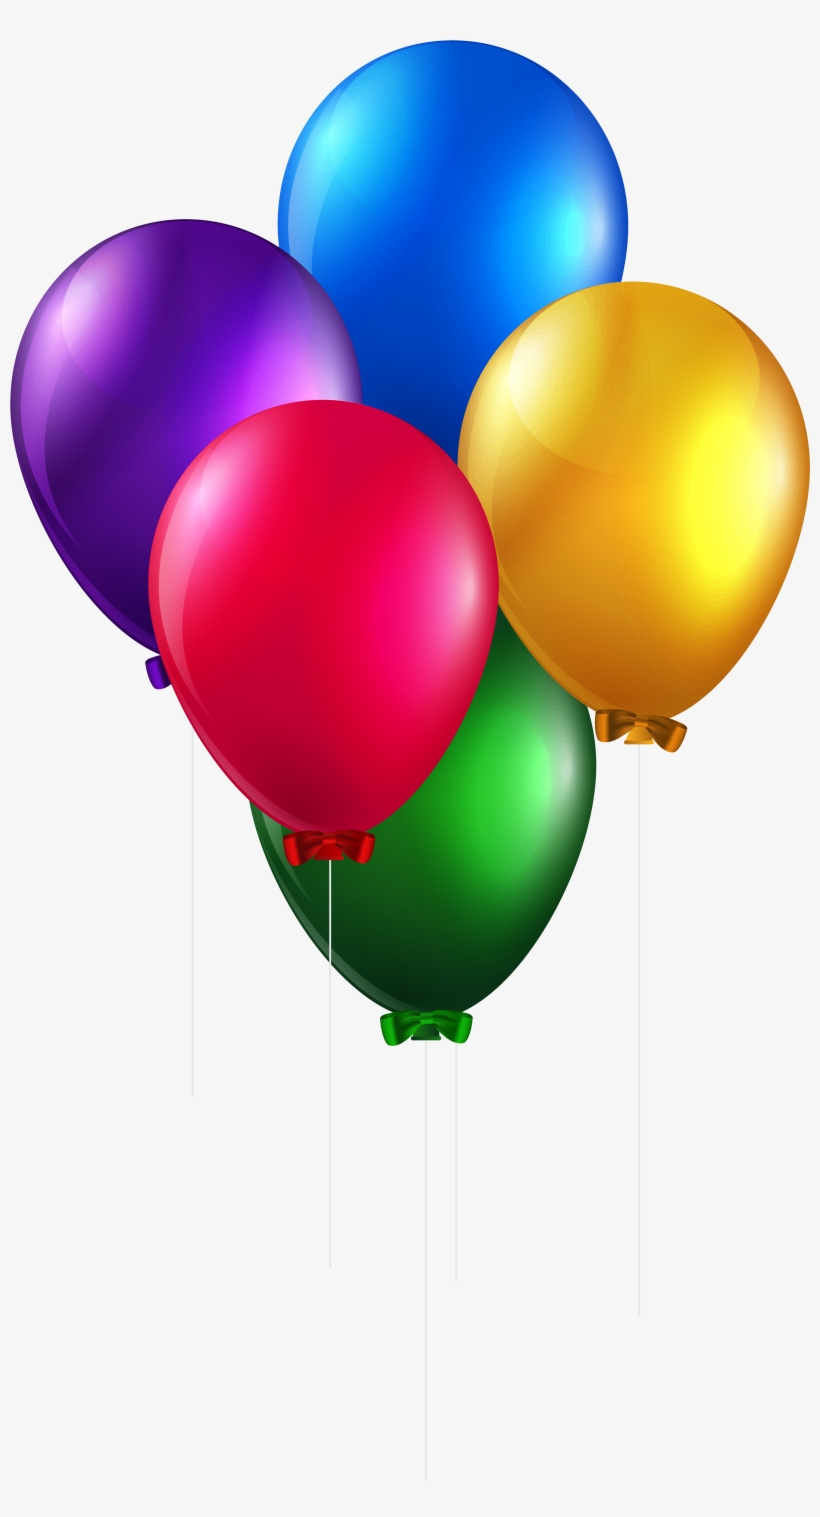 Balloons Png Clip Art Image Gallery Yopriceville - Birthday Balloons Transparent Background, transparent png #1314301